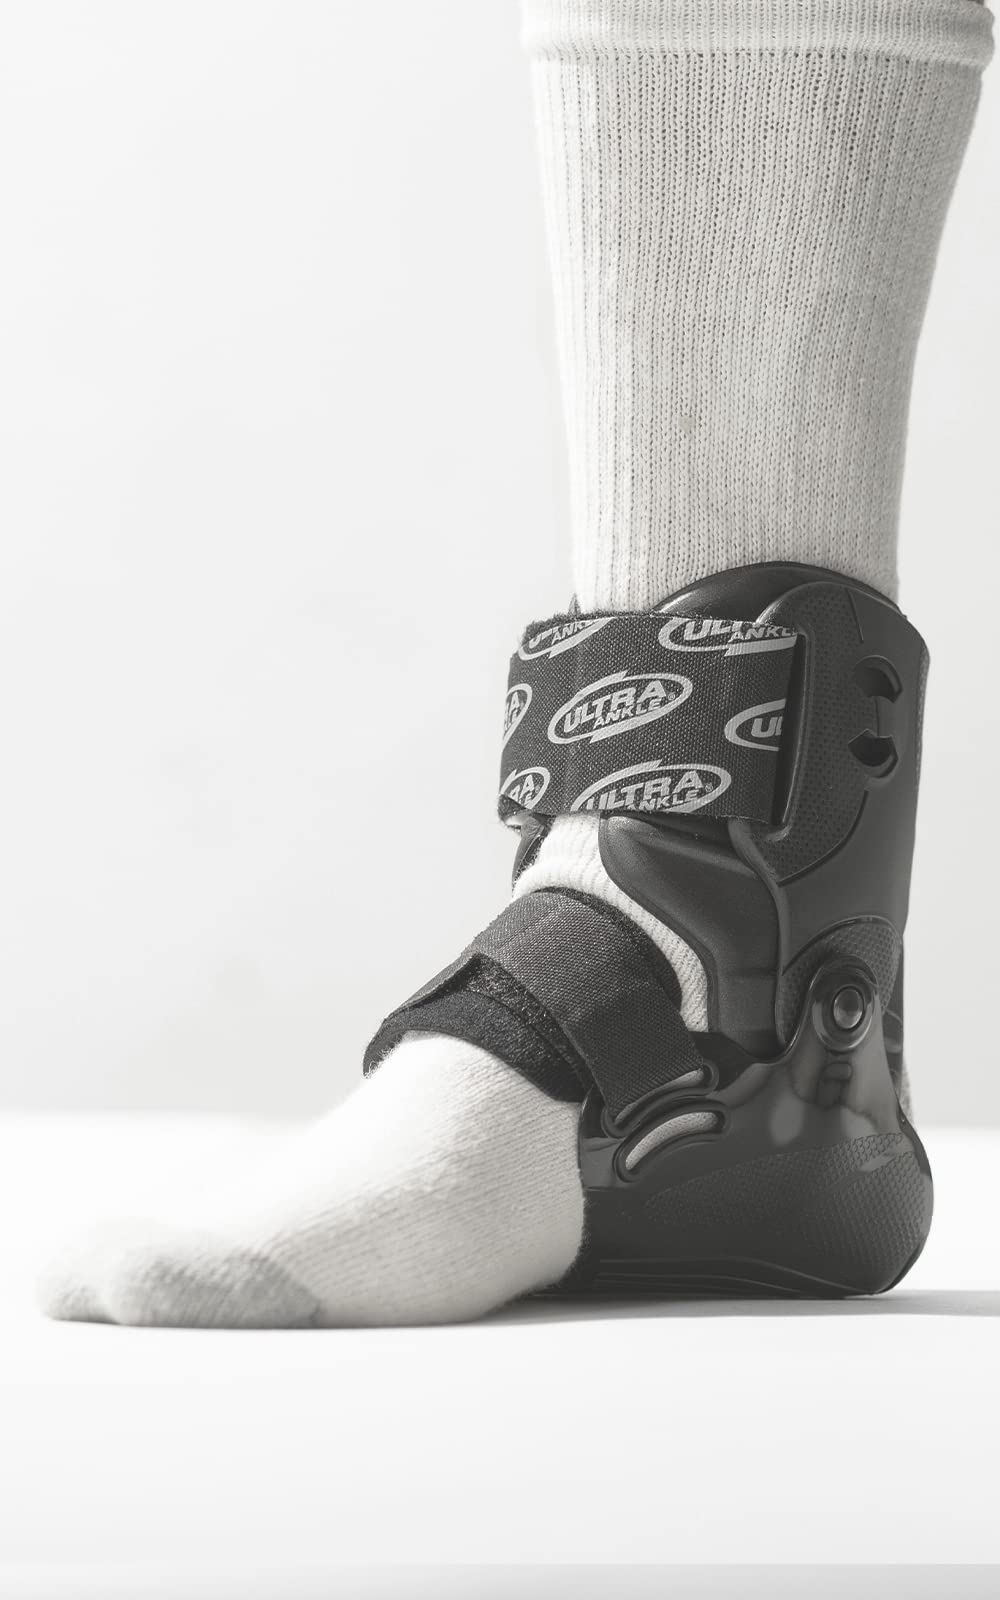 Ultra CTS® Ankle Brace for High Ankle Sprains, Acute Ankle Injuries, Ankle Osteoarthritis (OA), Transition from Walking Boot - S/M